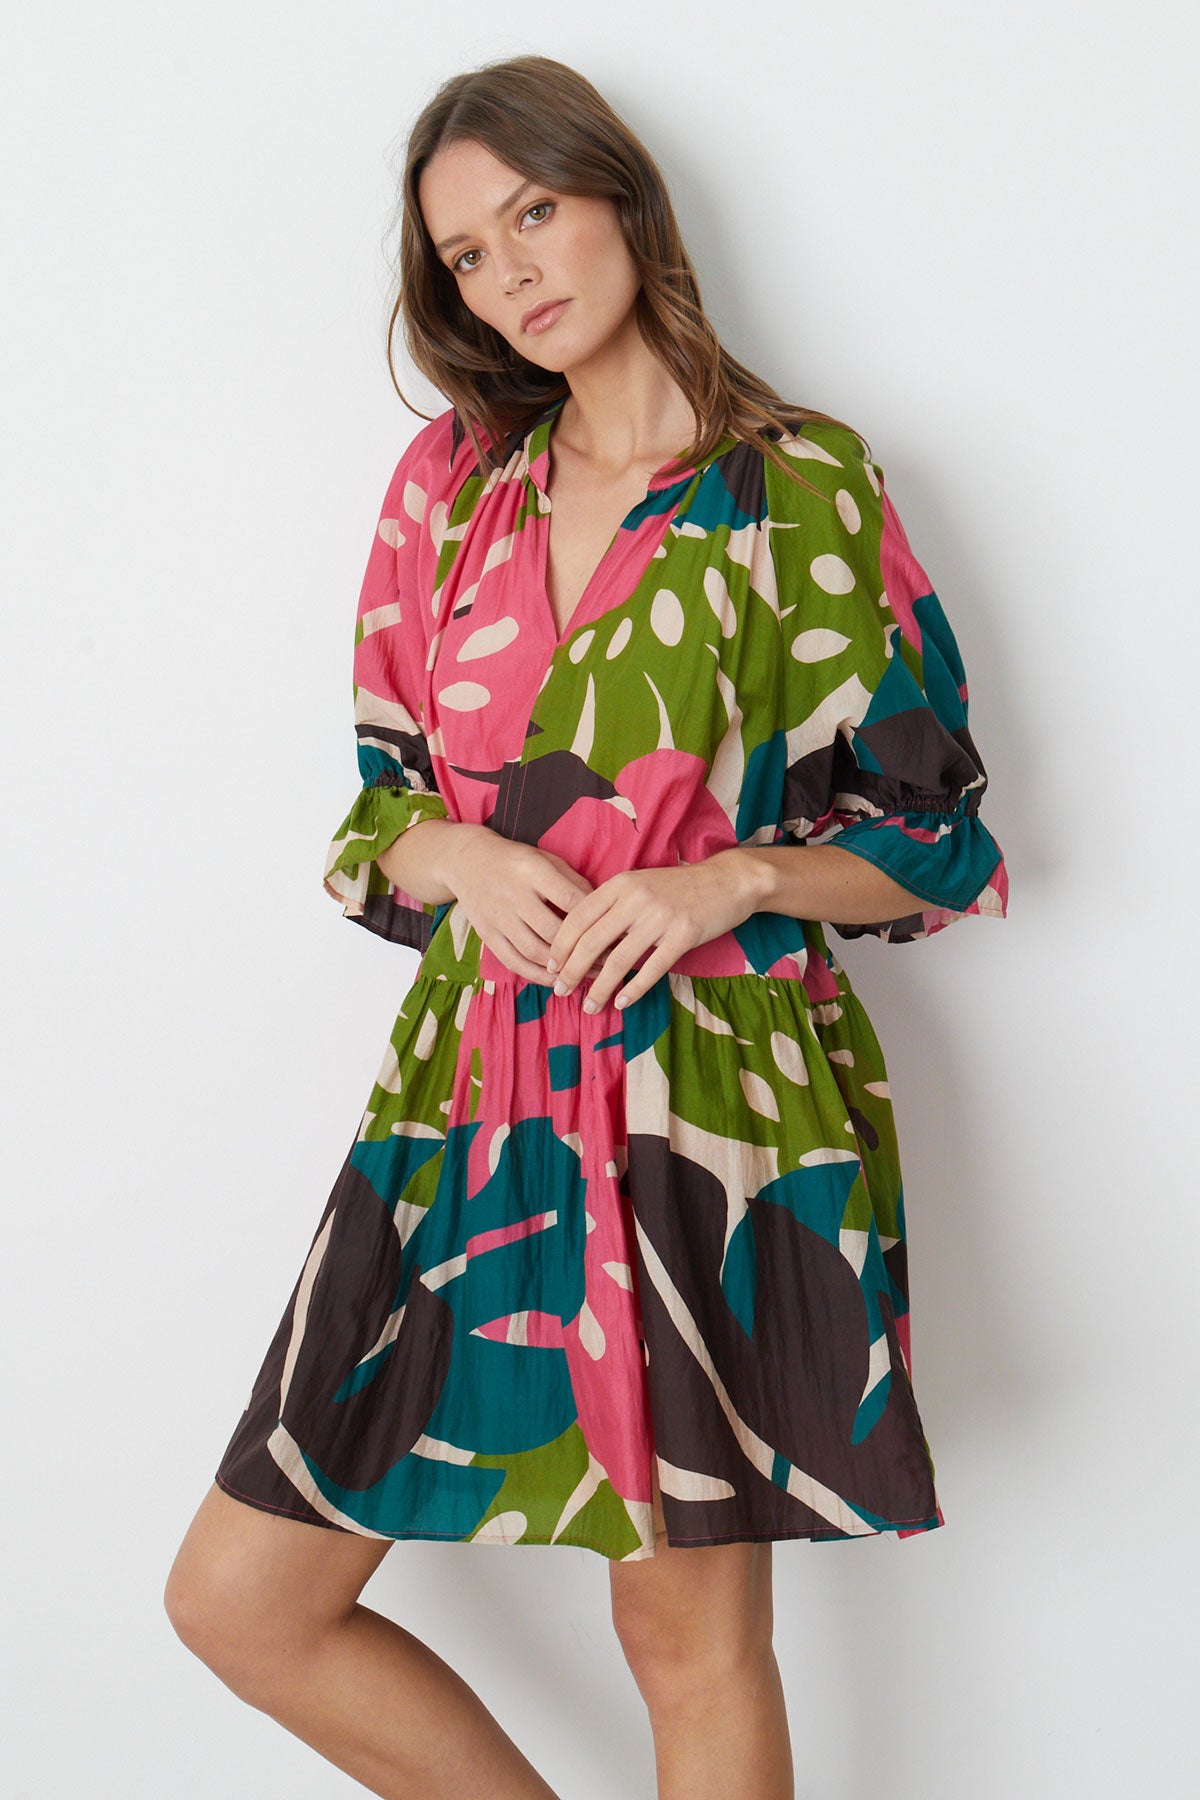 A model wearing a Velvet by Graham & Spencer TRACY PRINTED DRESS in bold colored Monstera print-26577279254721